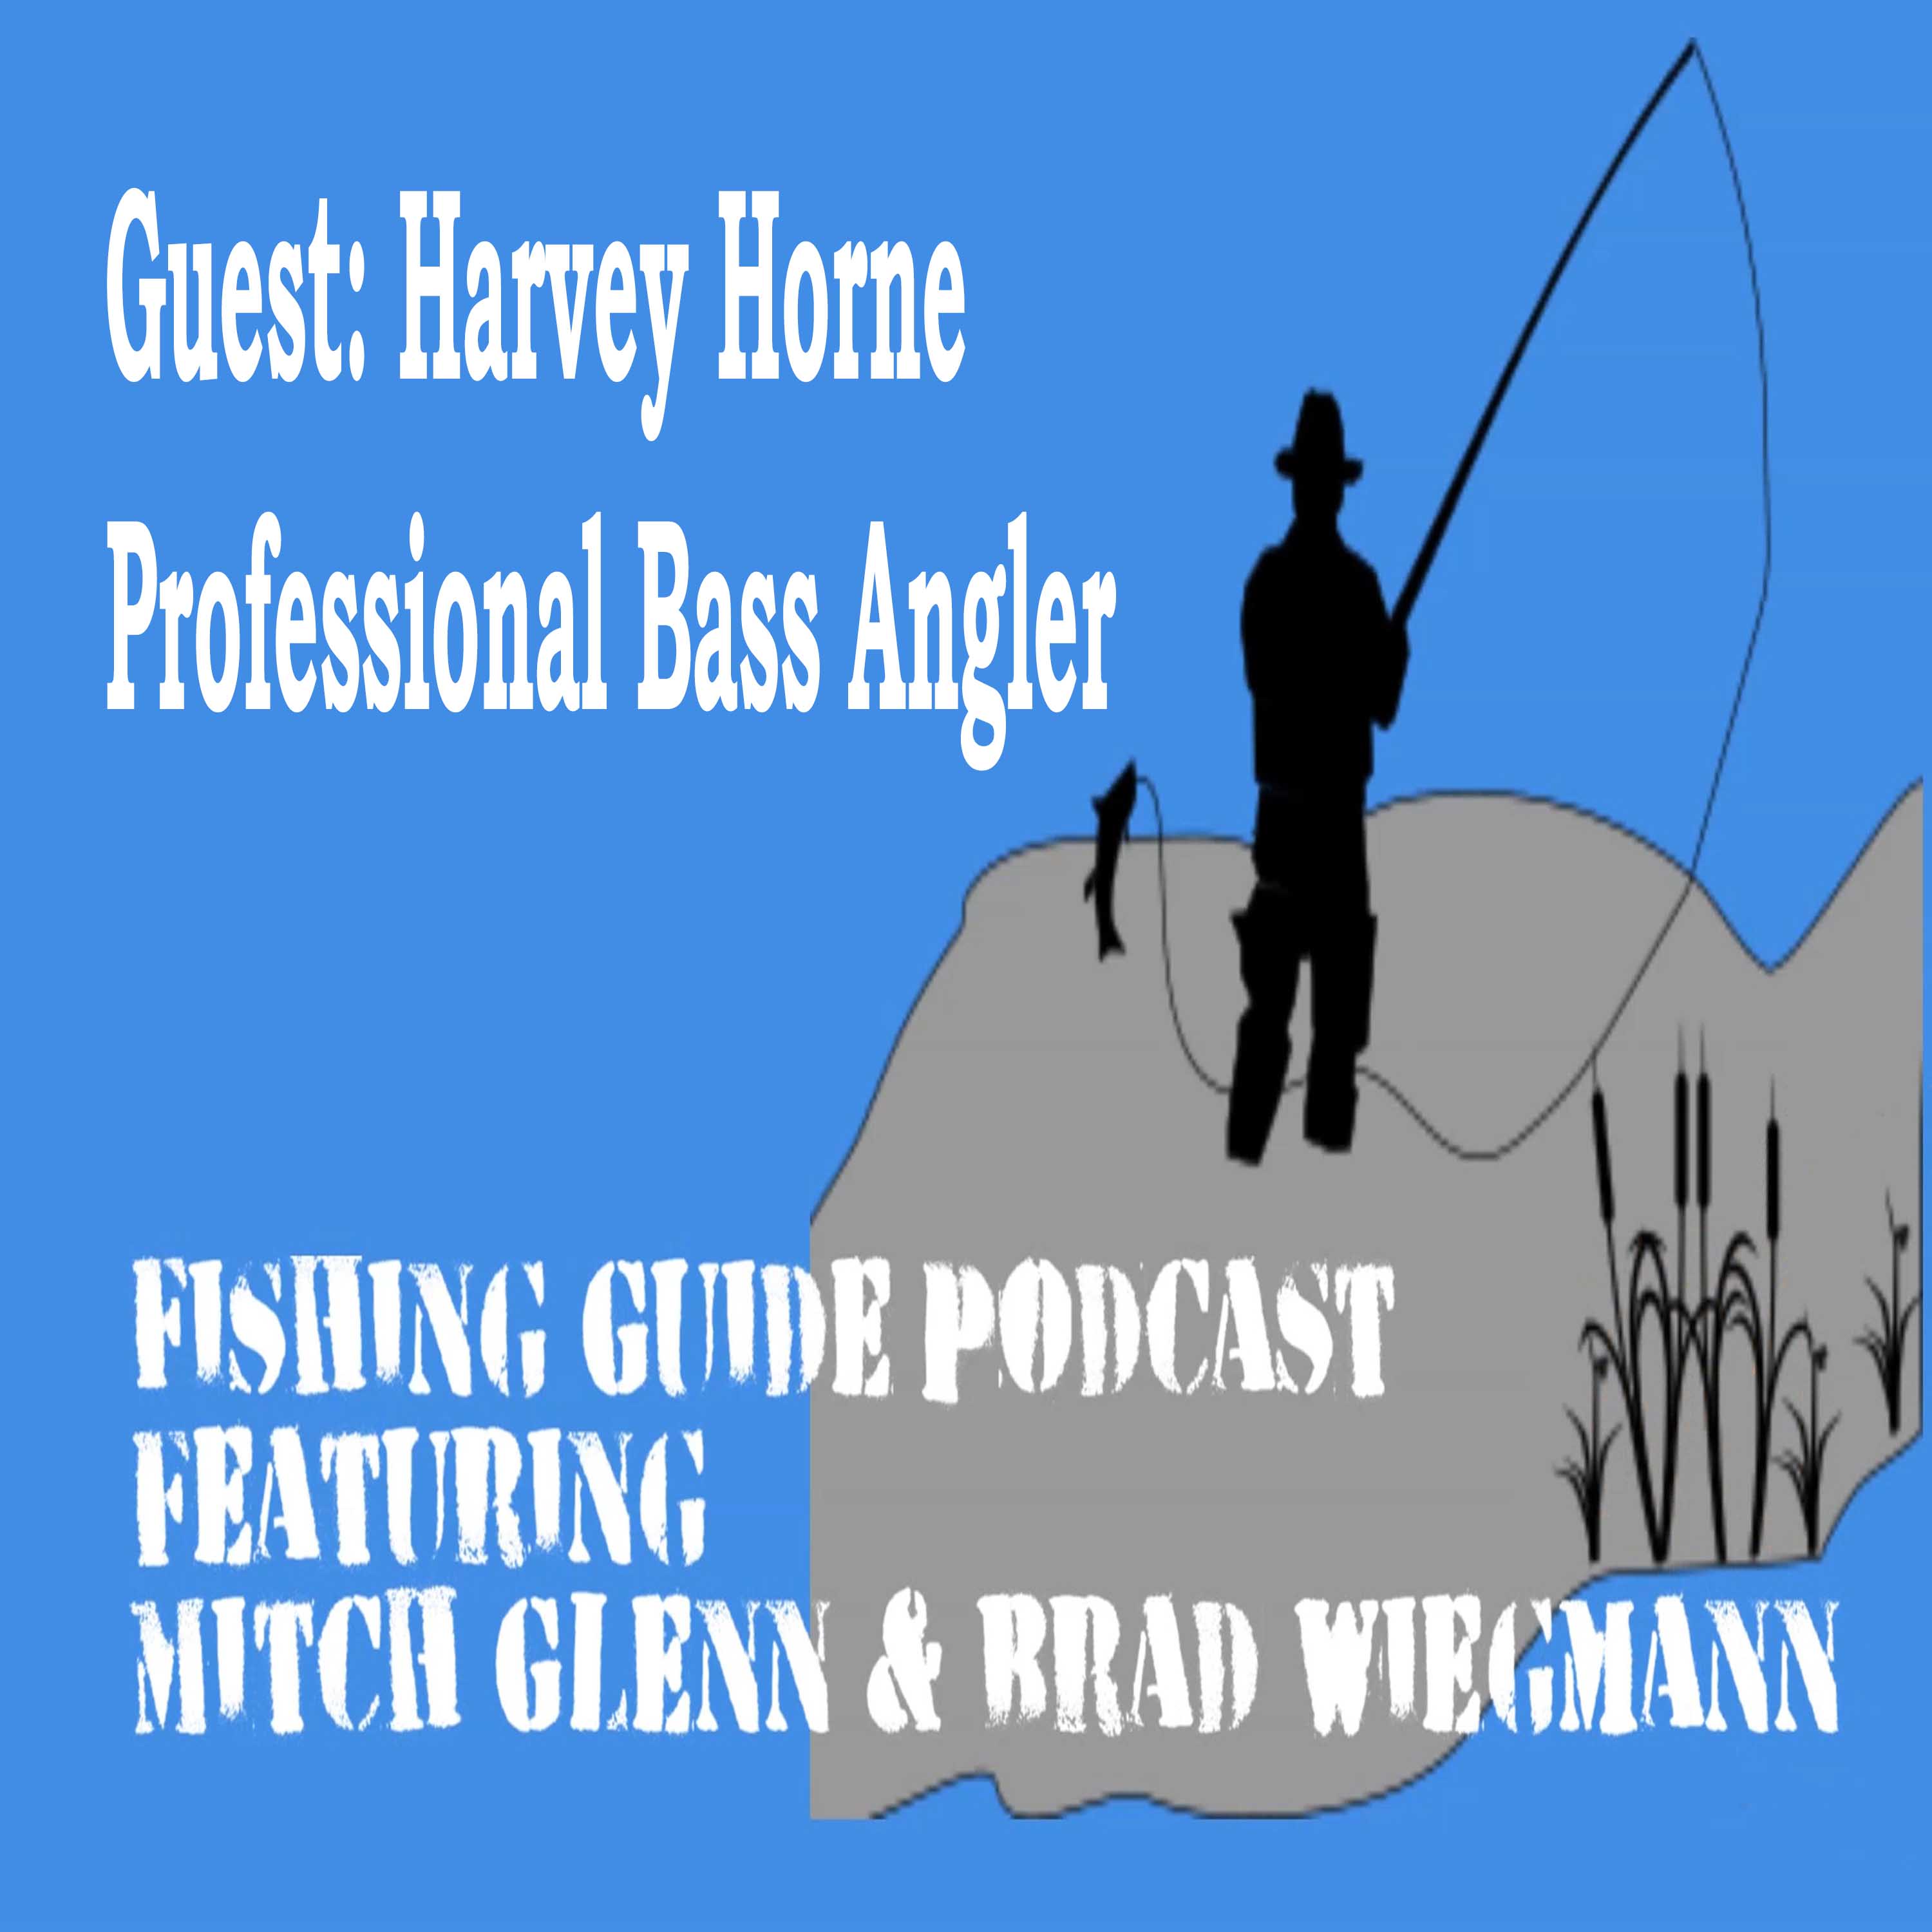 Northwest Arkansas BASSmaster Elite Series pro Harvey Horne visits about his journey to becoming an angler and life as a professional bass angler: Episode 15 